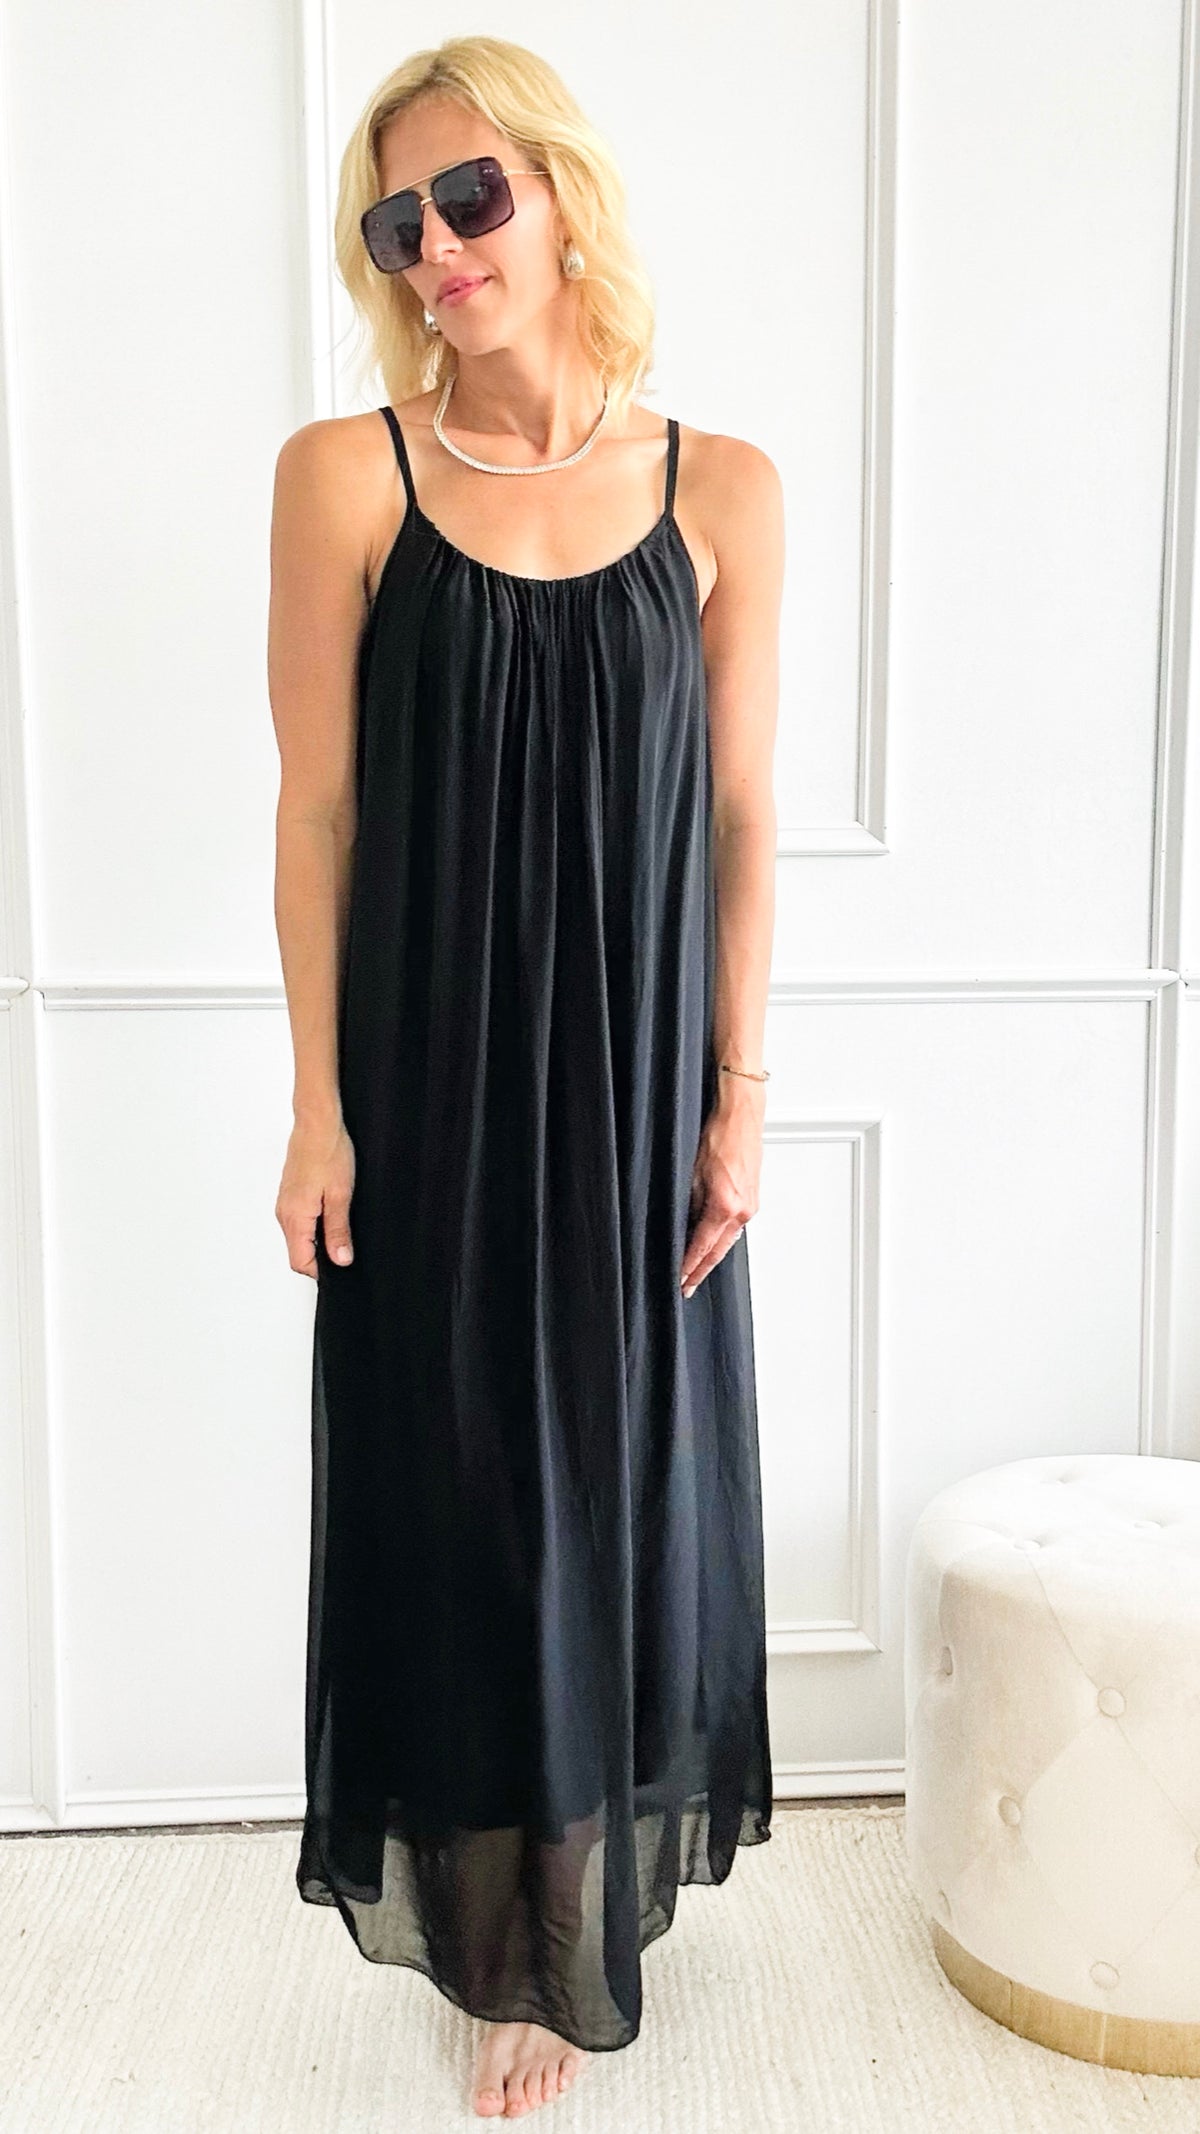 Breezy Sheer Italian Sundress - Black-200 Dresses/Jumpsuits/Rompers-Italianissimo-Coastal Bloom Boutique, find the trendiest versions of the popular styles and looks Located in Indialantic, FL